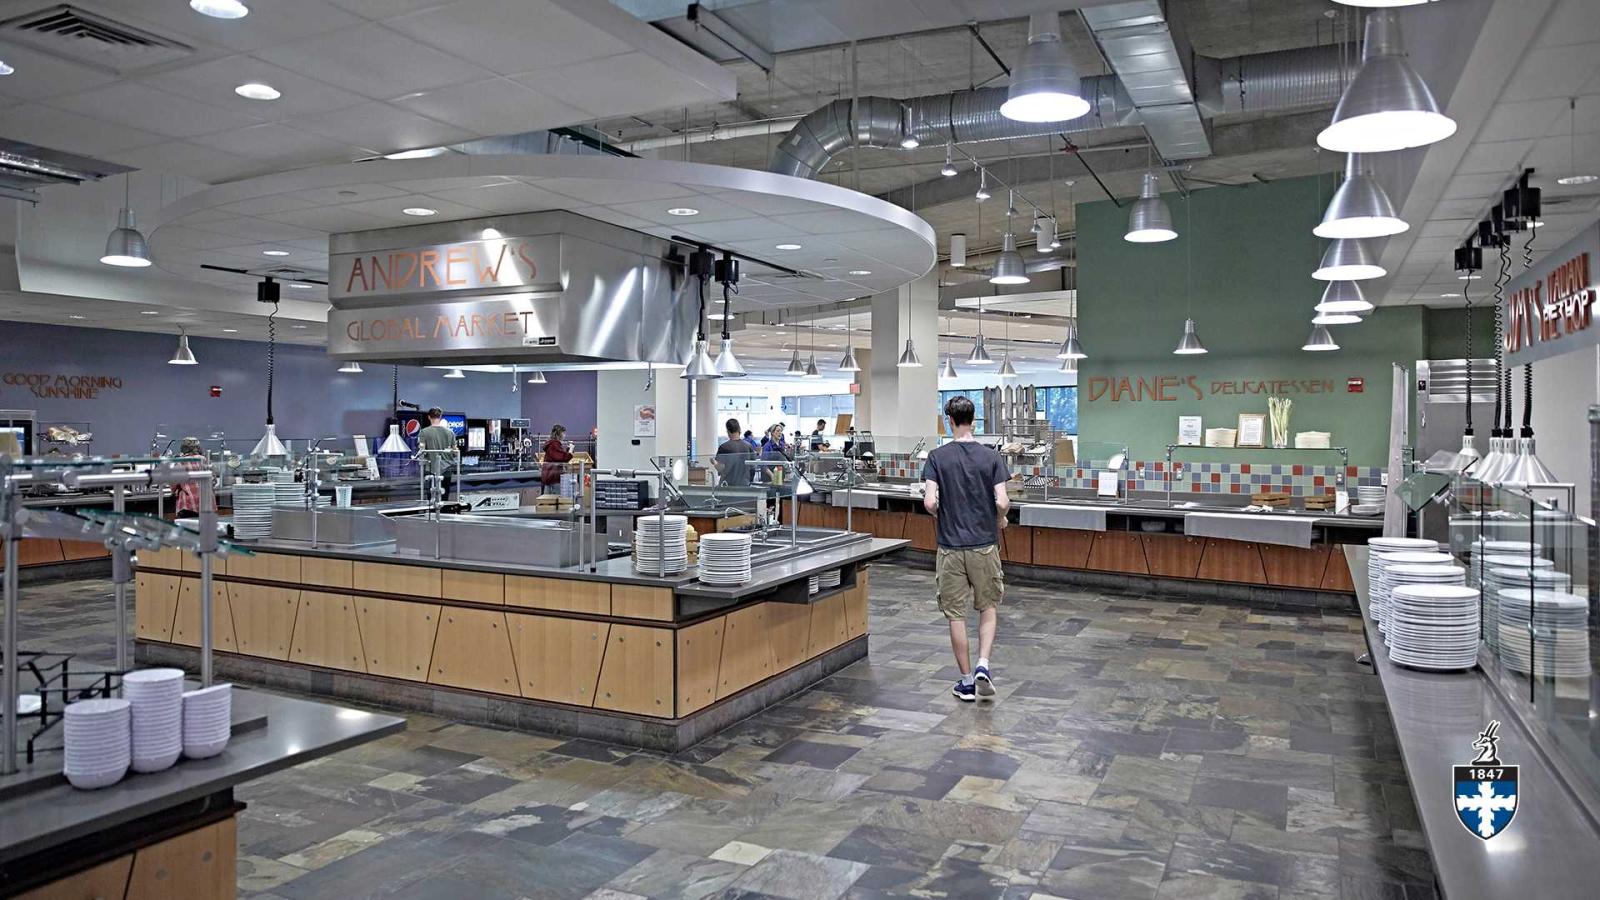 Student walking into buffet food stations in large, open cafeteria.